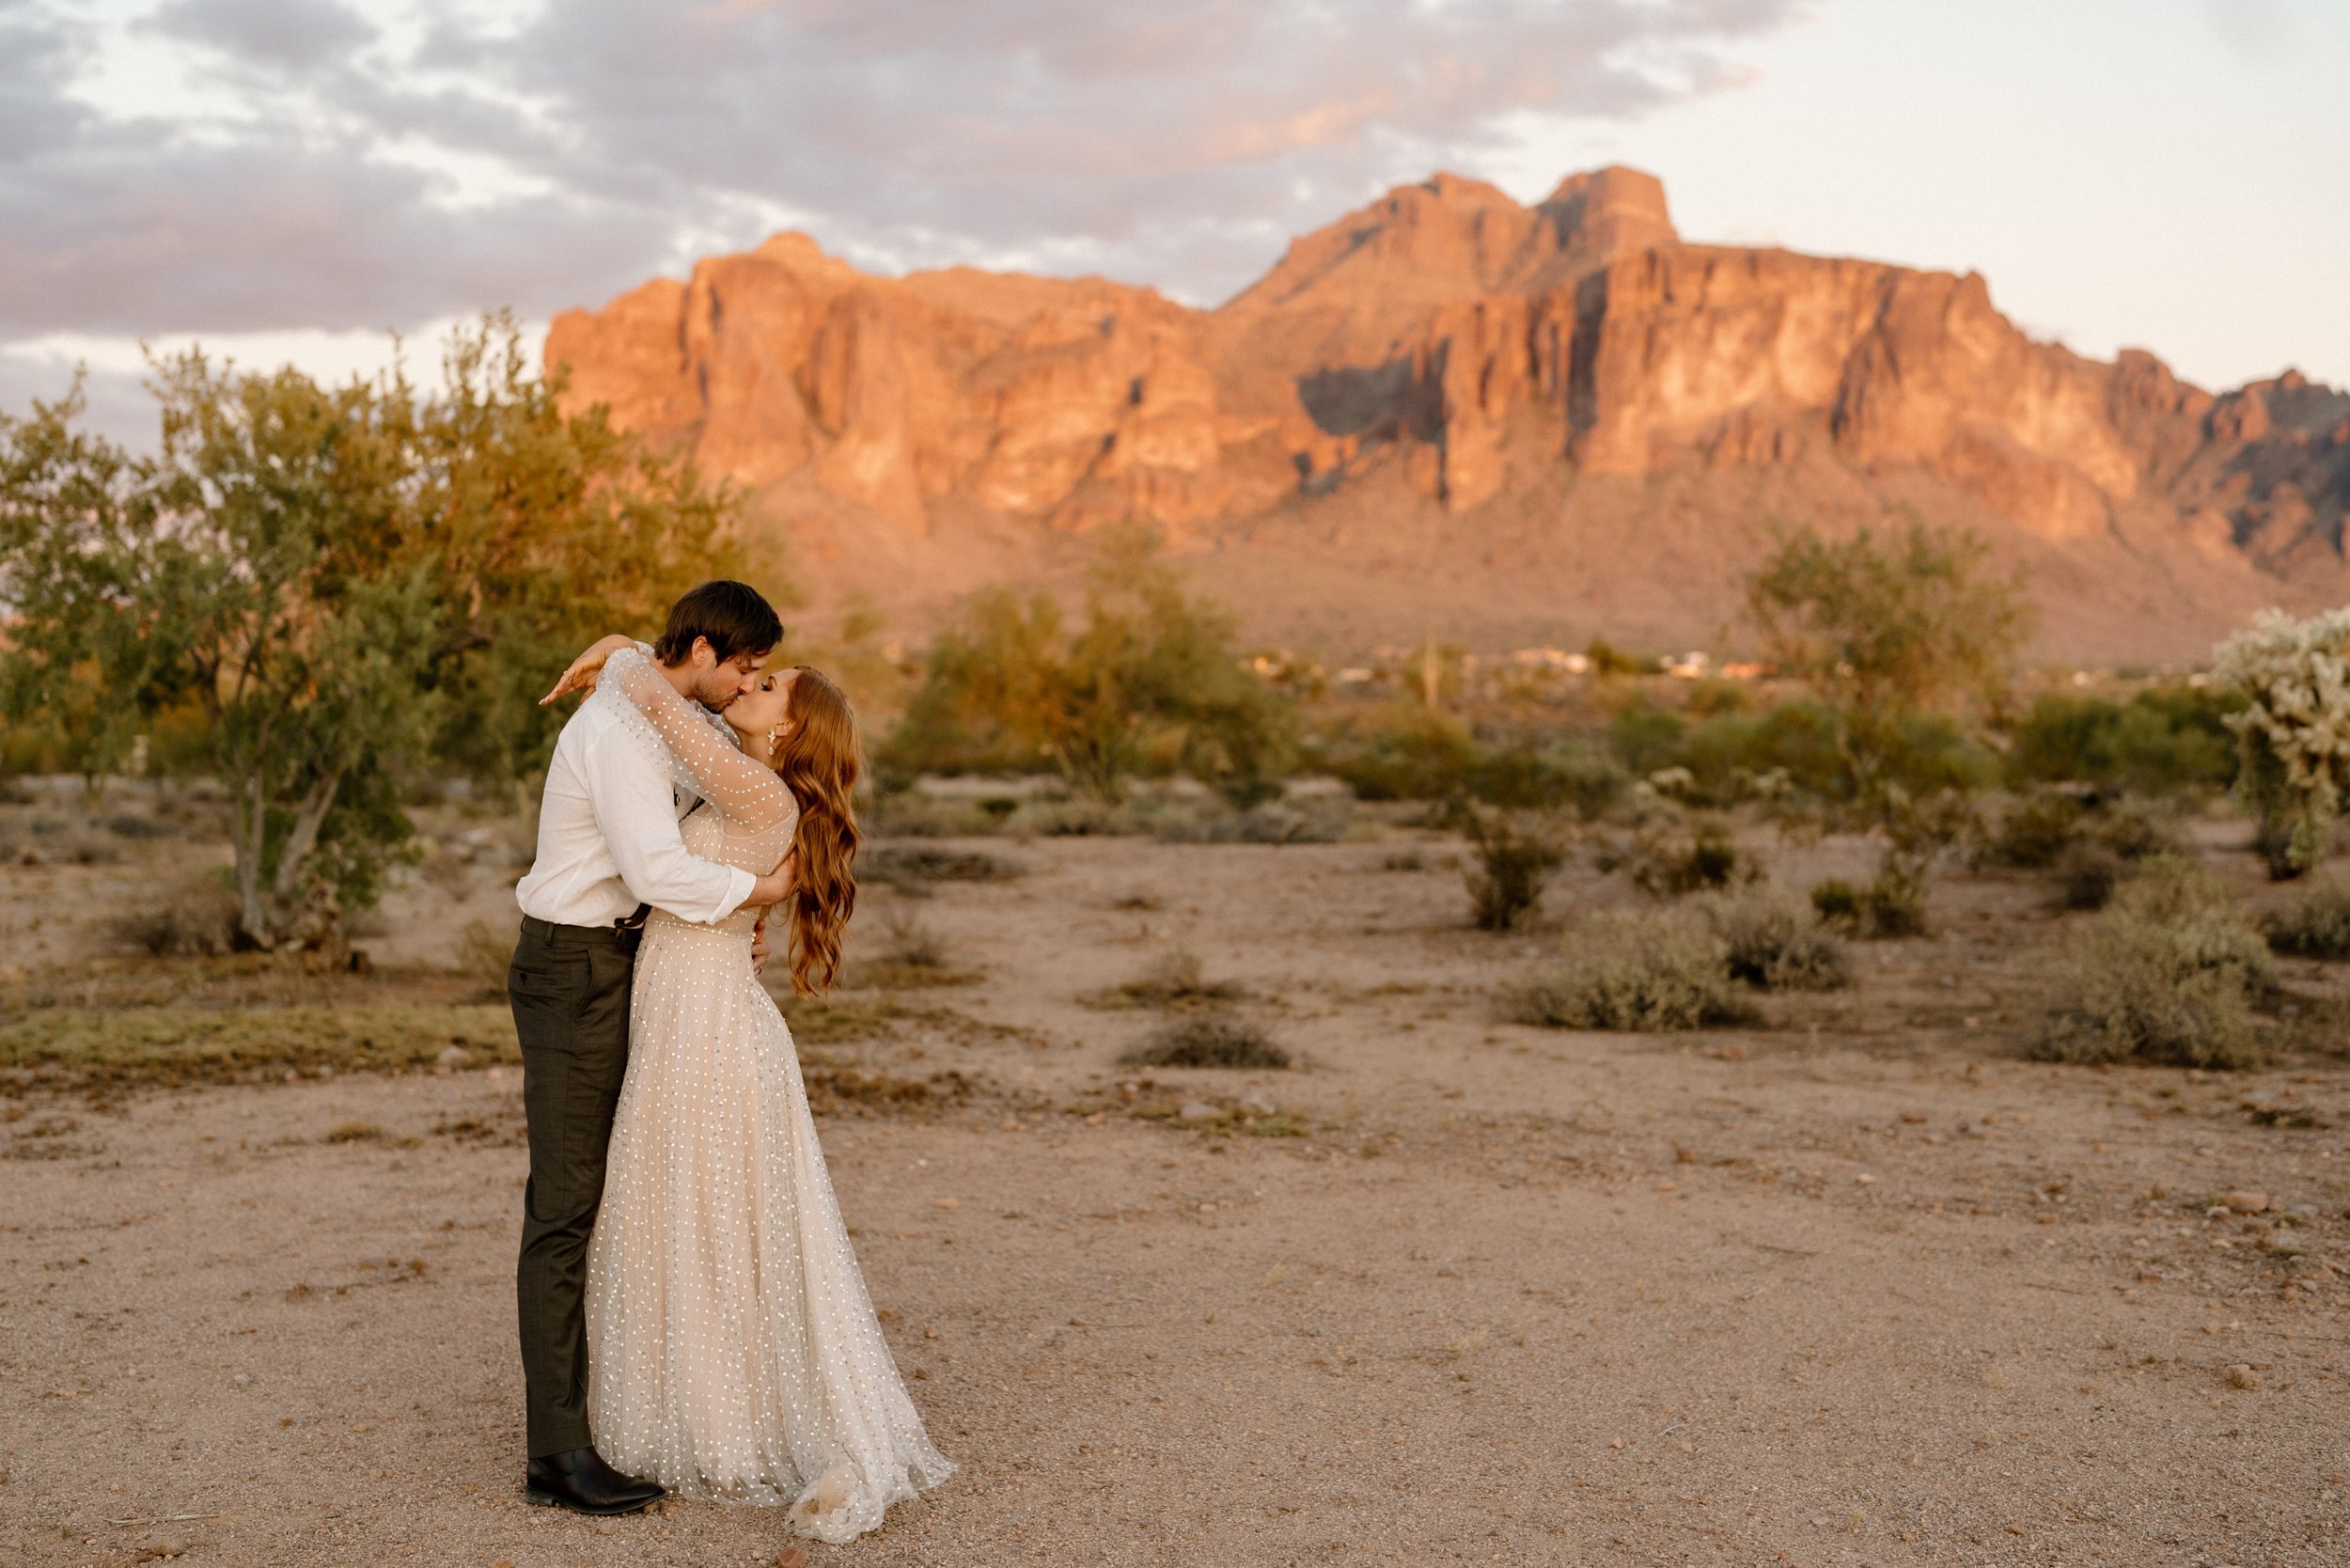 043_Wedding at The Paseo venue in Apache Junction, Arizona only 45 minutes from Phoenix..jpg